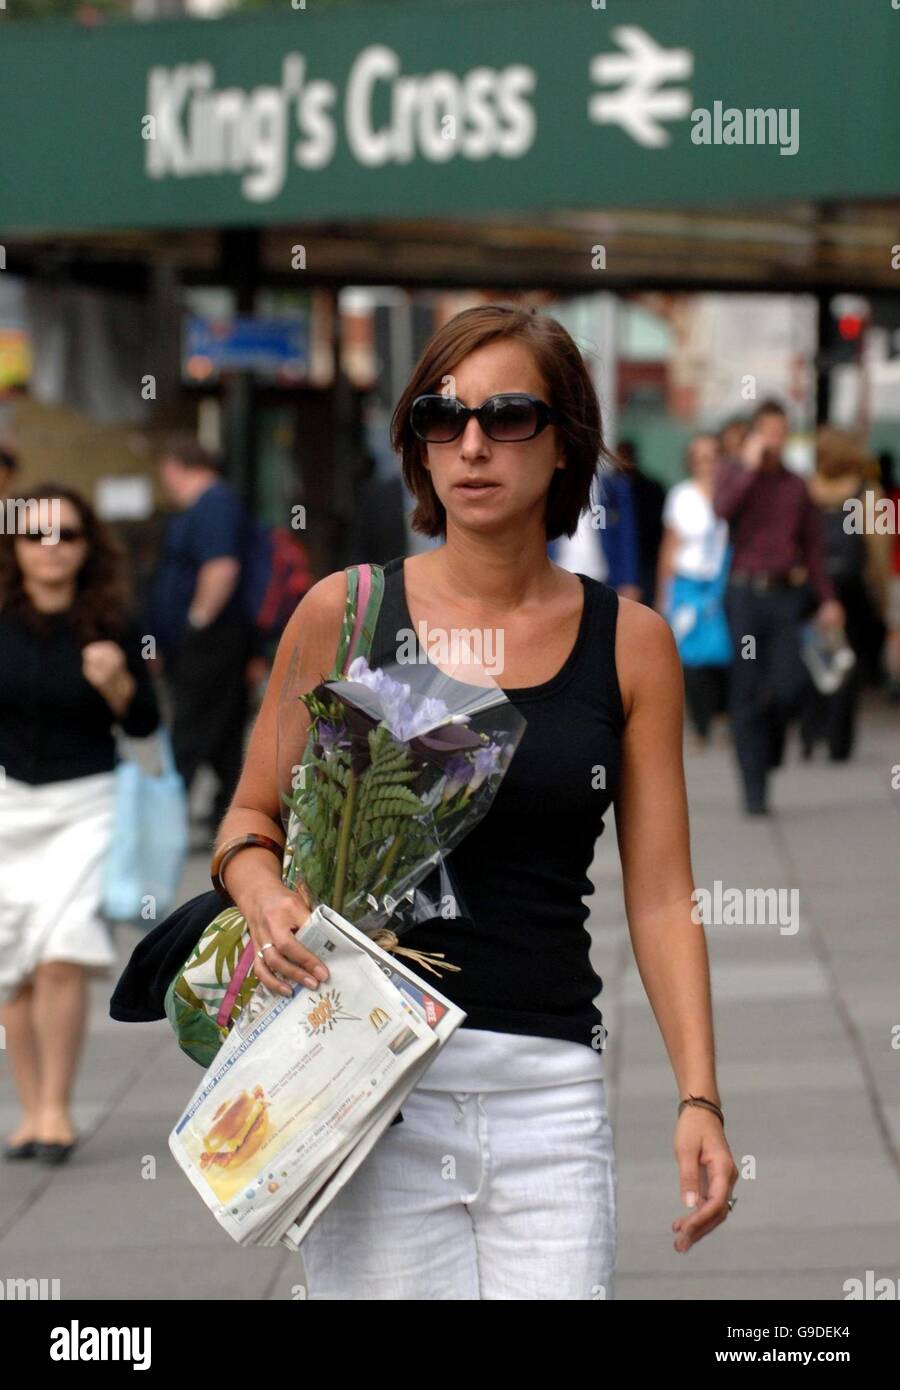 A commuter arrives with flowers at Kings Cross Station, London, on the first anniversary of the terrorist bombings. Stock Photo